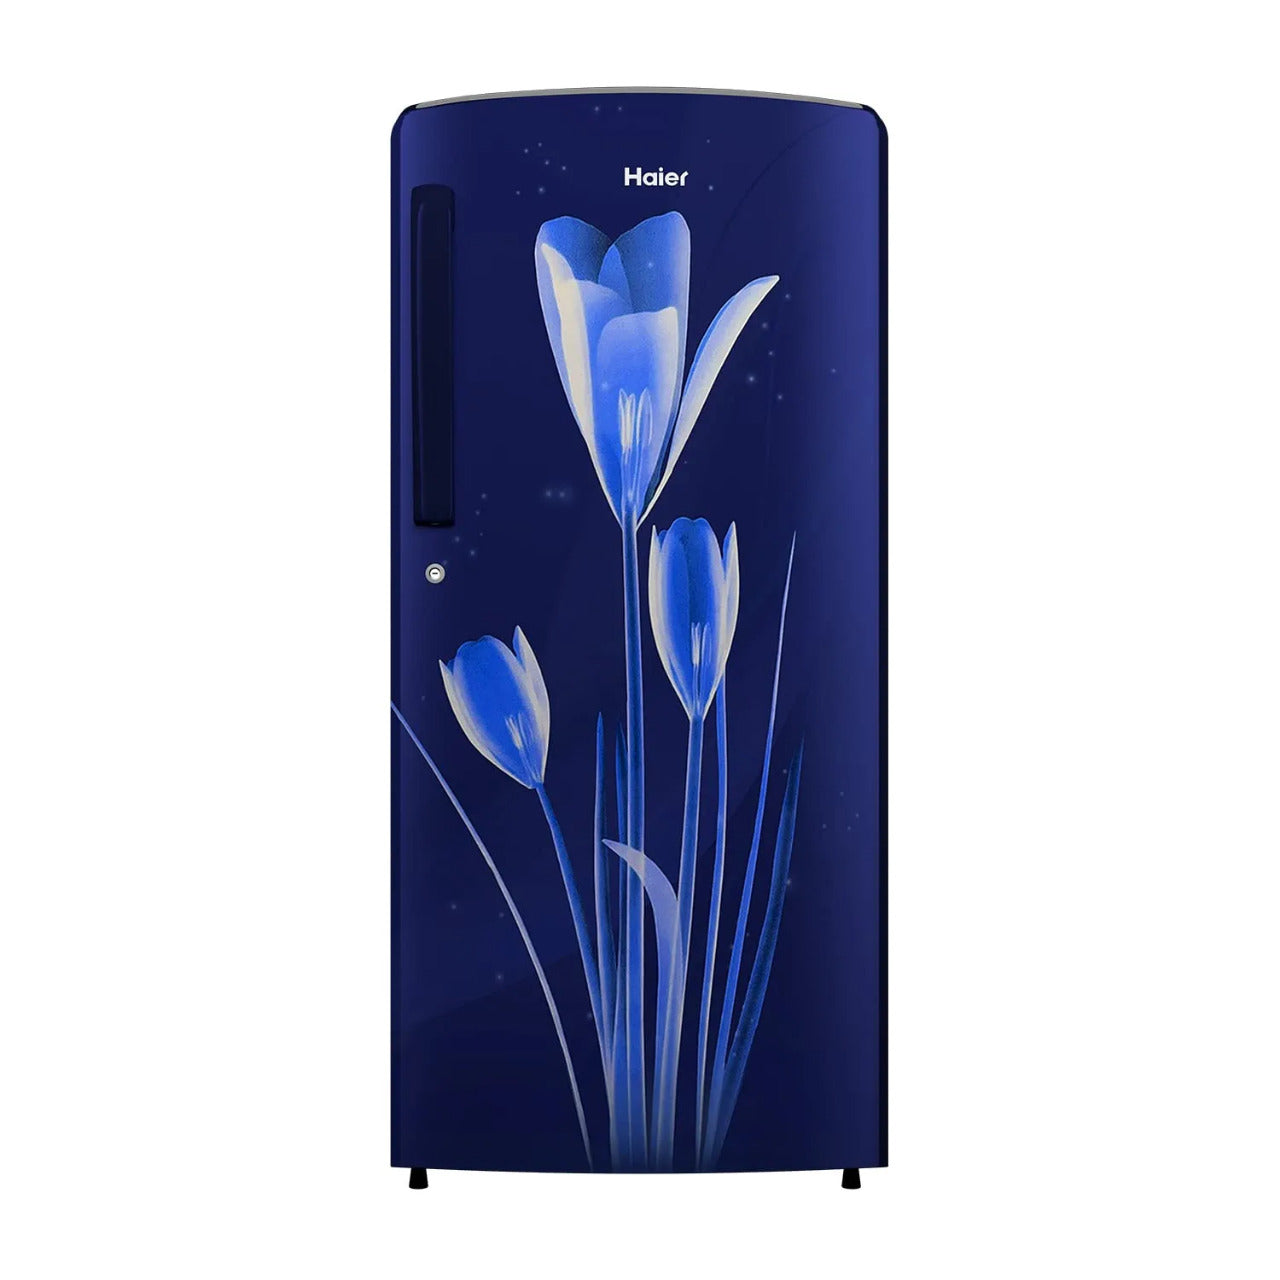 Haier 182 L 2 Star Direct Cool Single Door Refrigerator HED-18BML-E